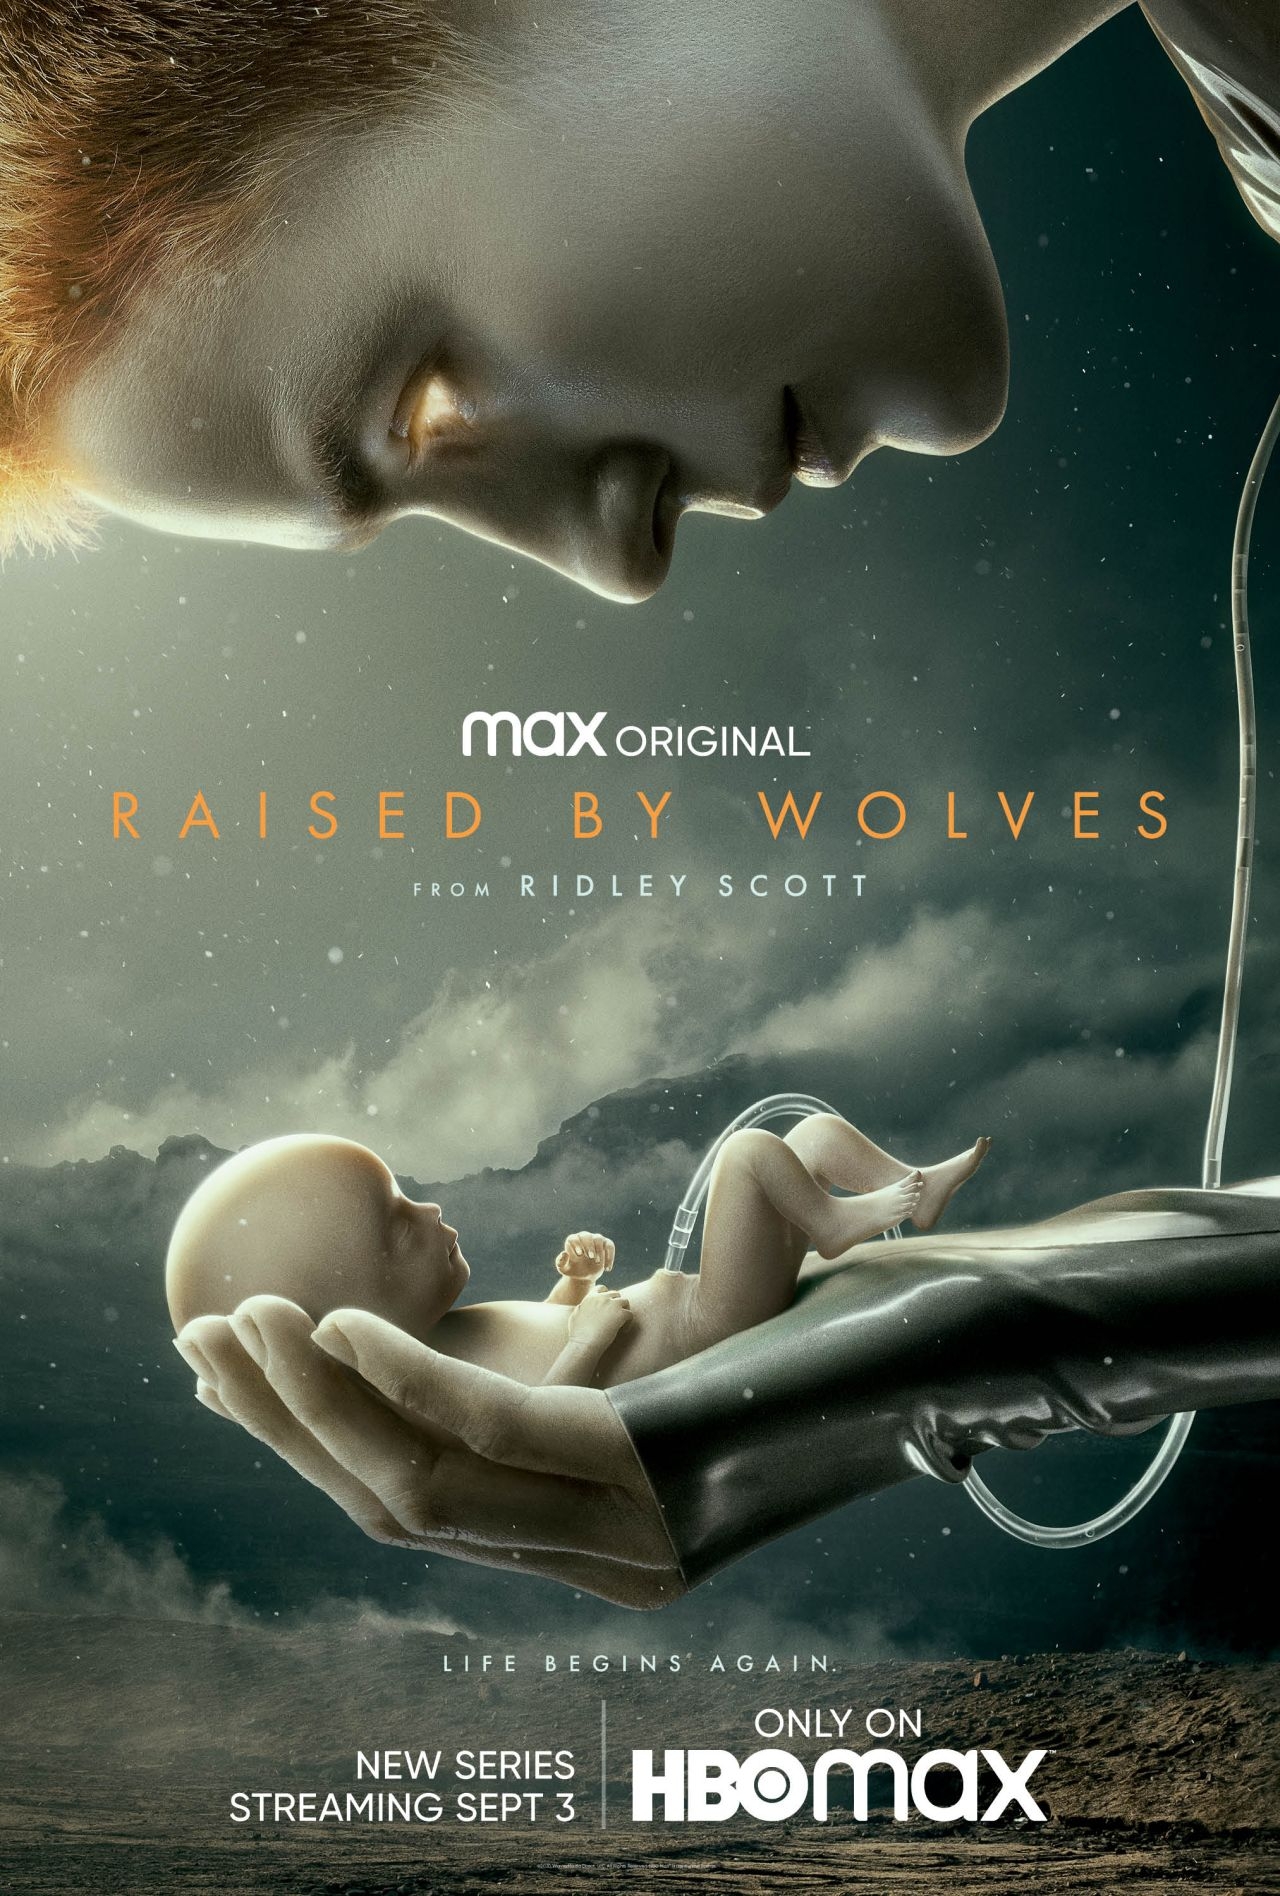 HBO Max Drops New Ridley Scott 'Raised by Wolves' Sci-Fi Series